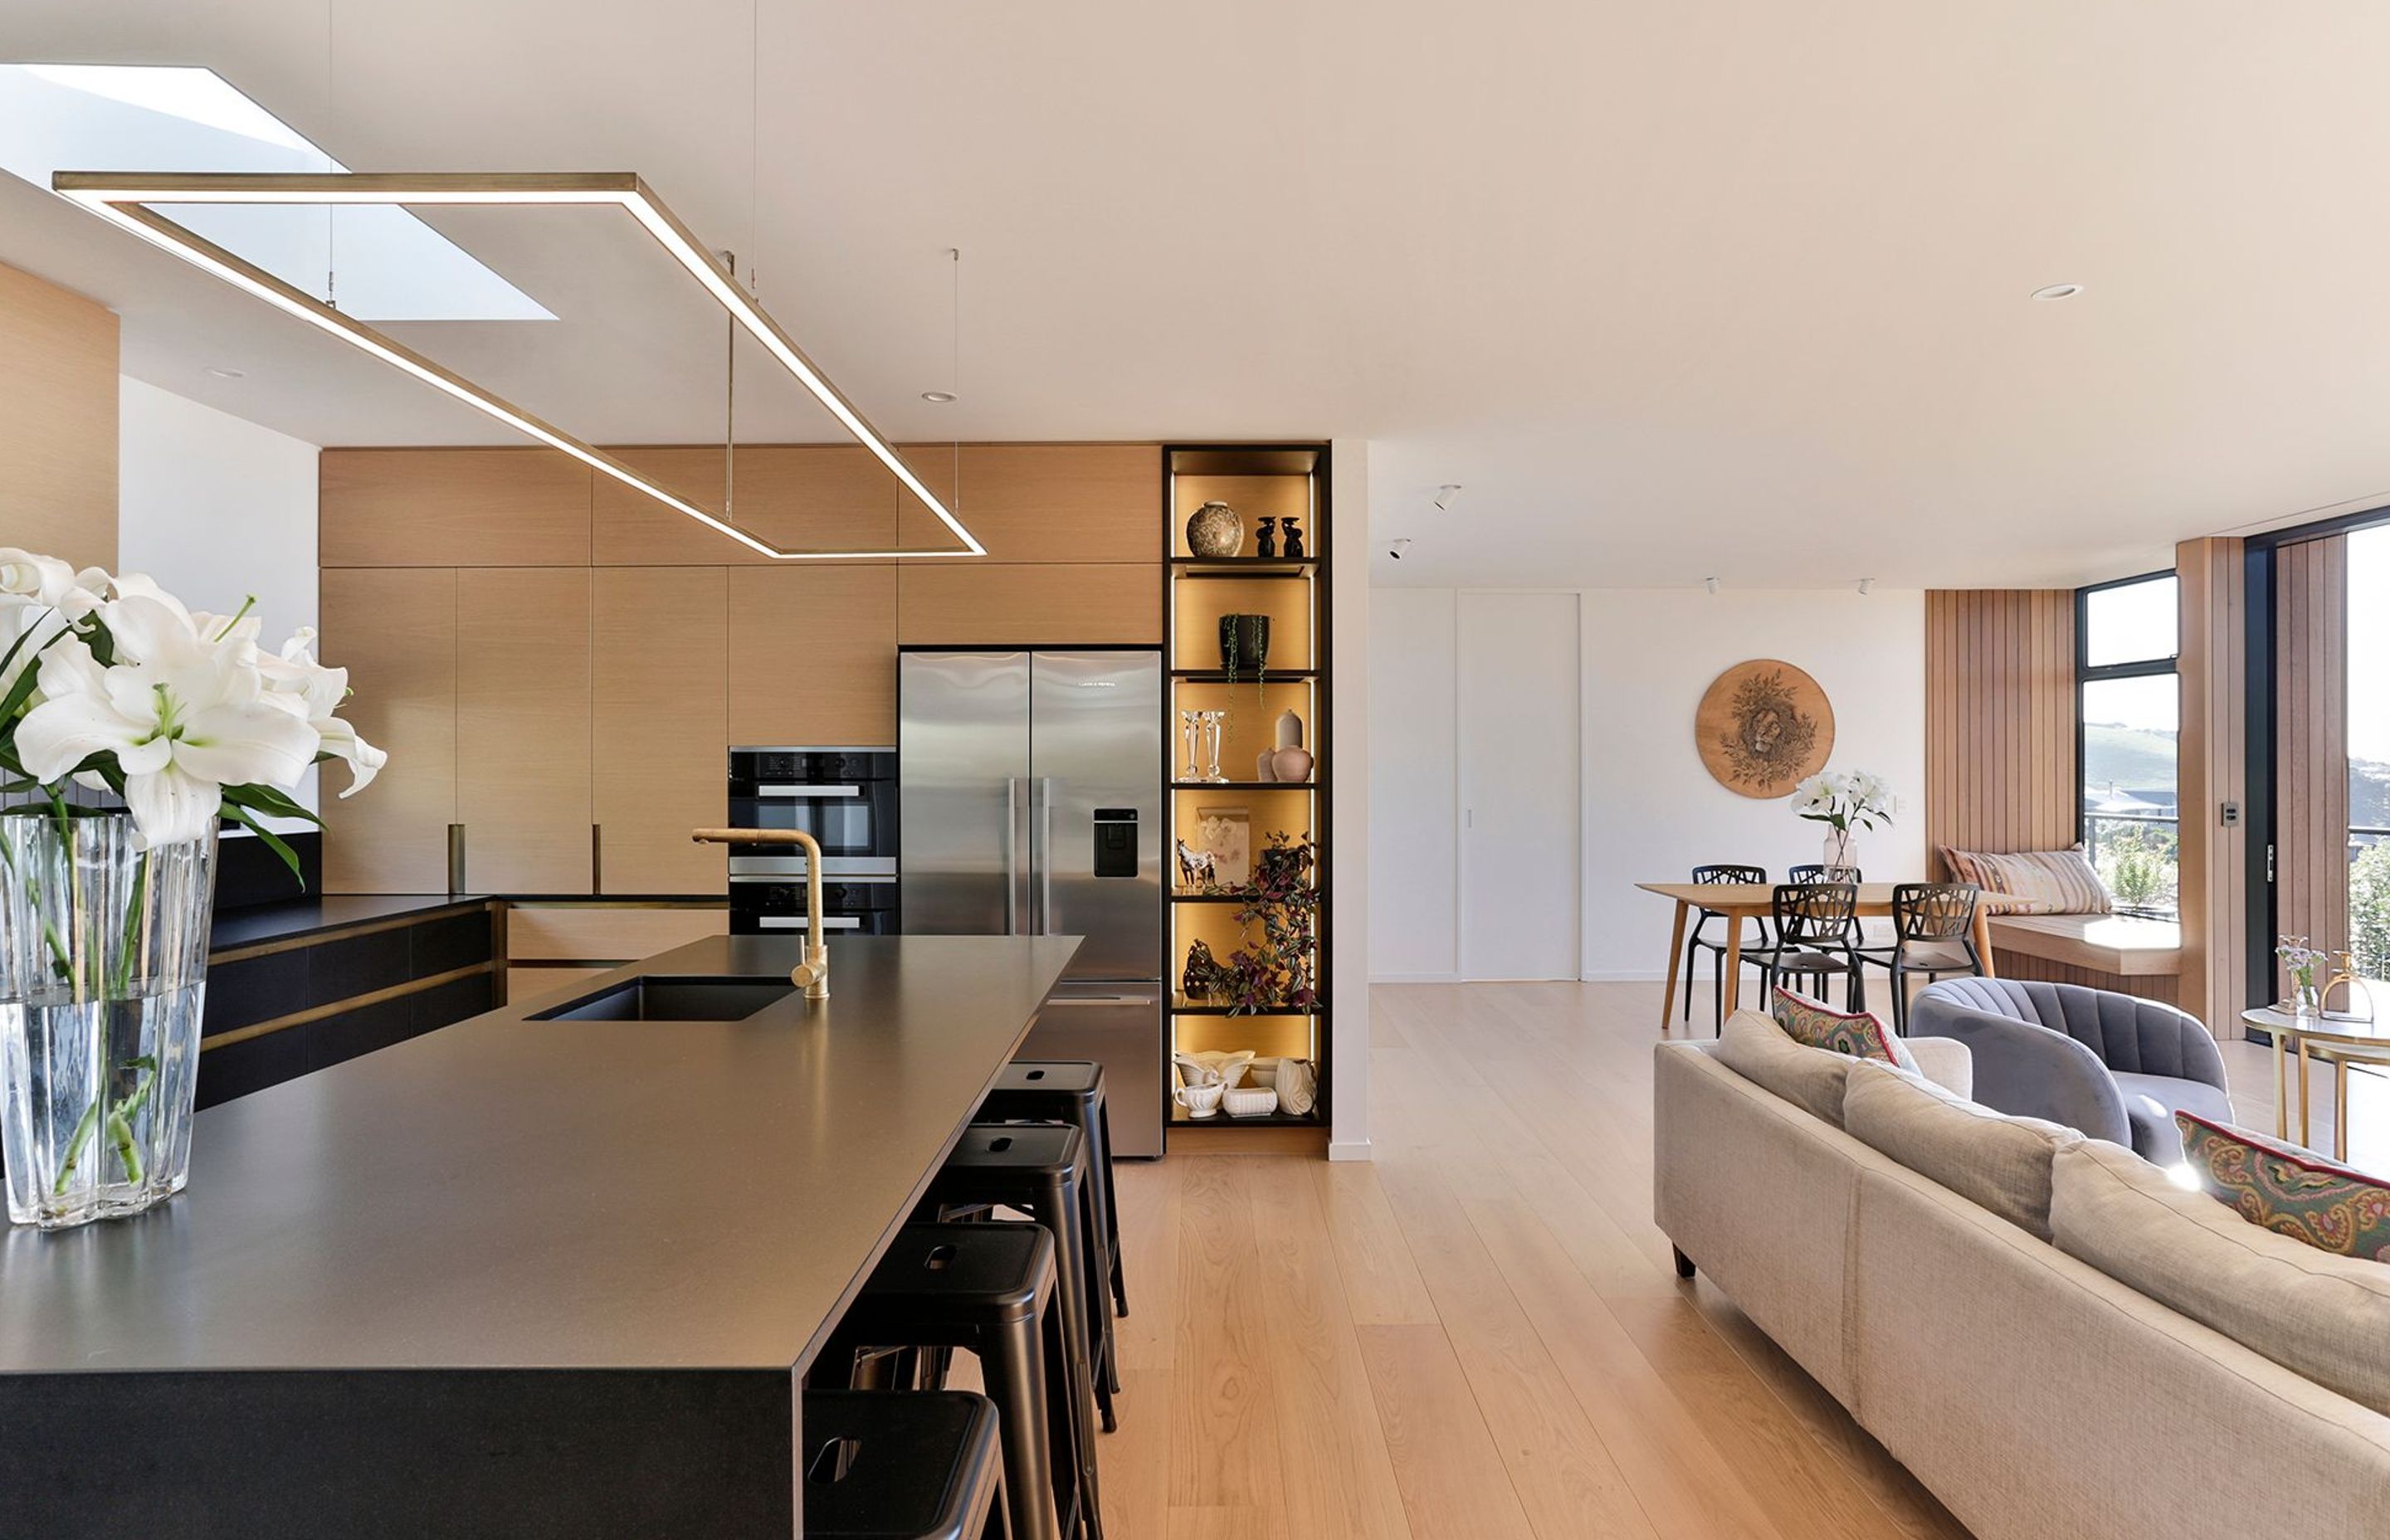 The kitchen was designed by Davinia Sutton to reflect the overall architectural language of the house.